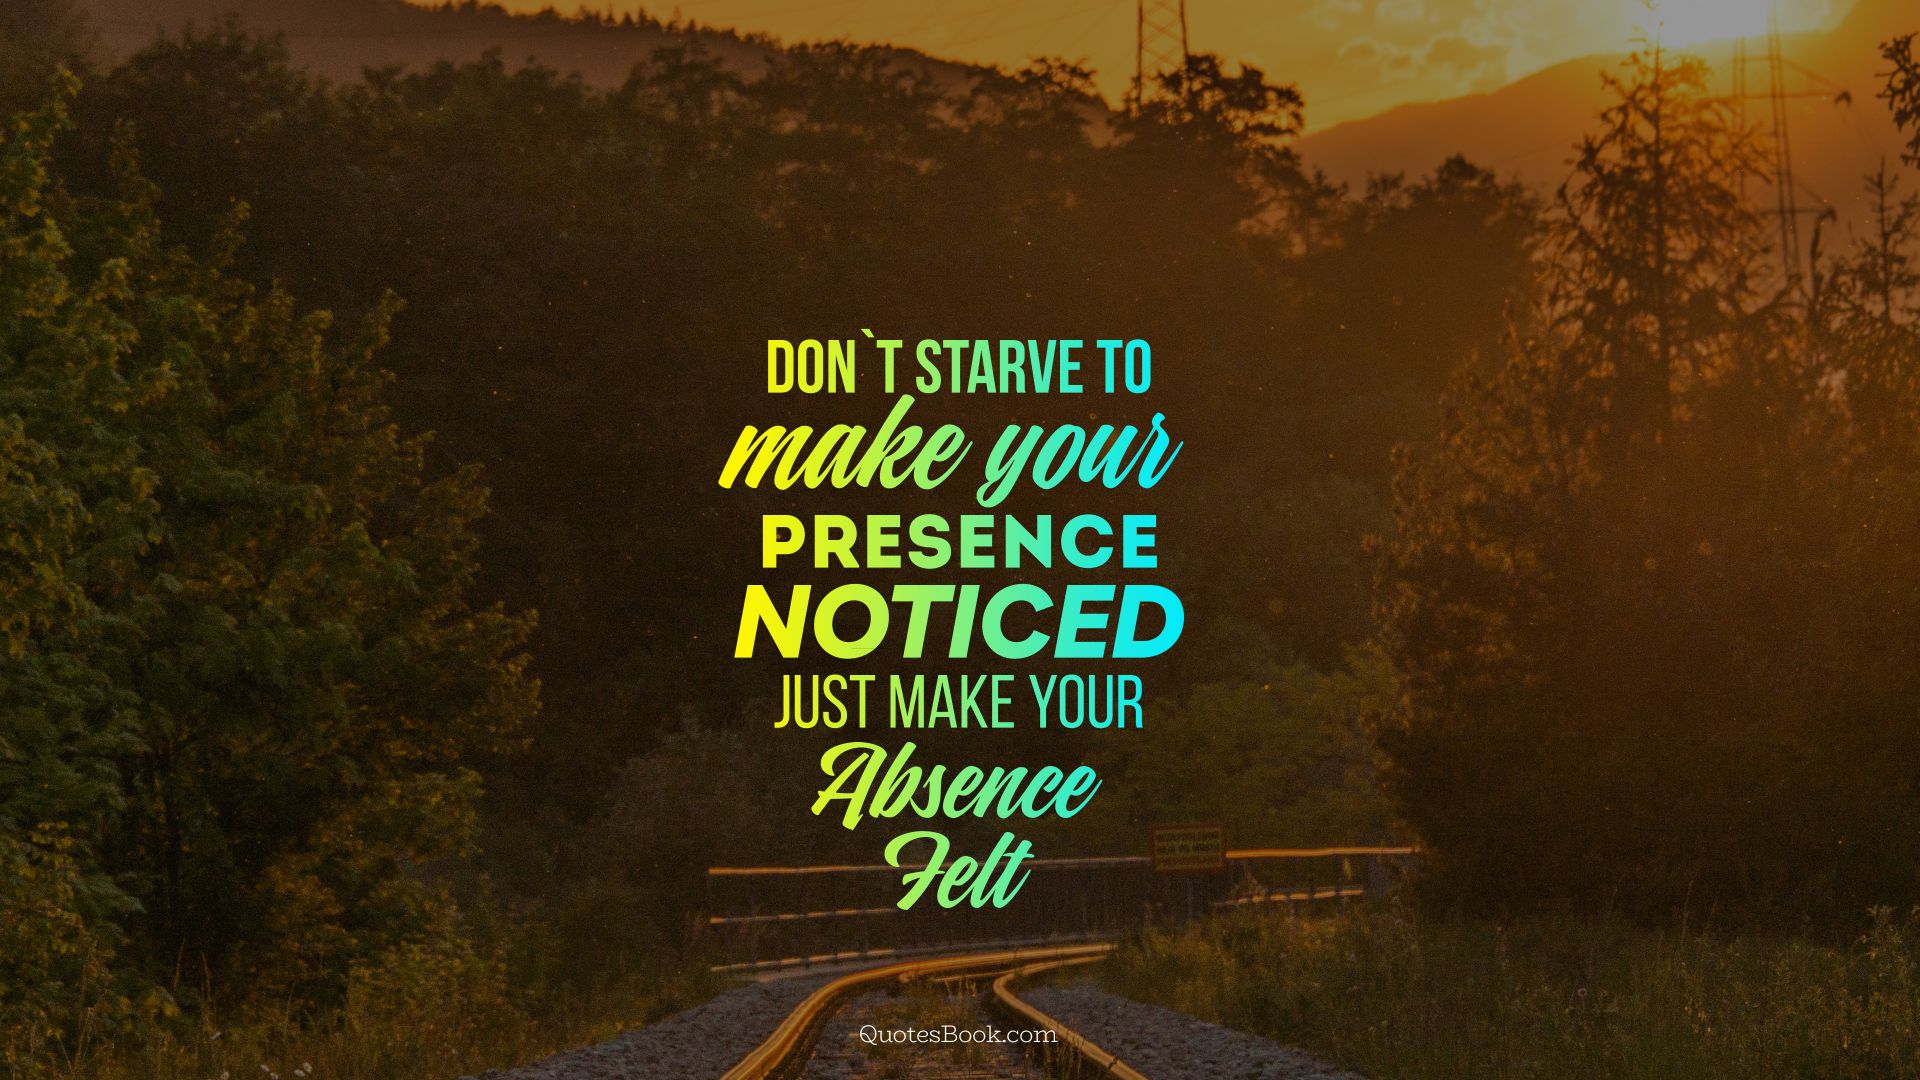 Don`t starve to make your presence noticed just make your absence felt